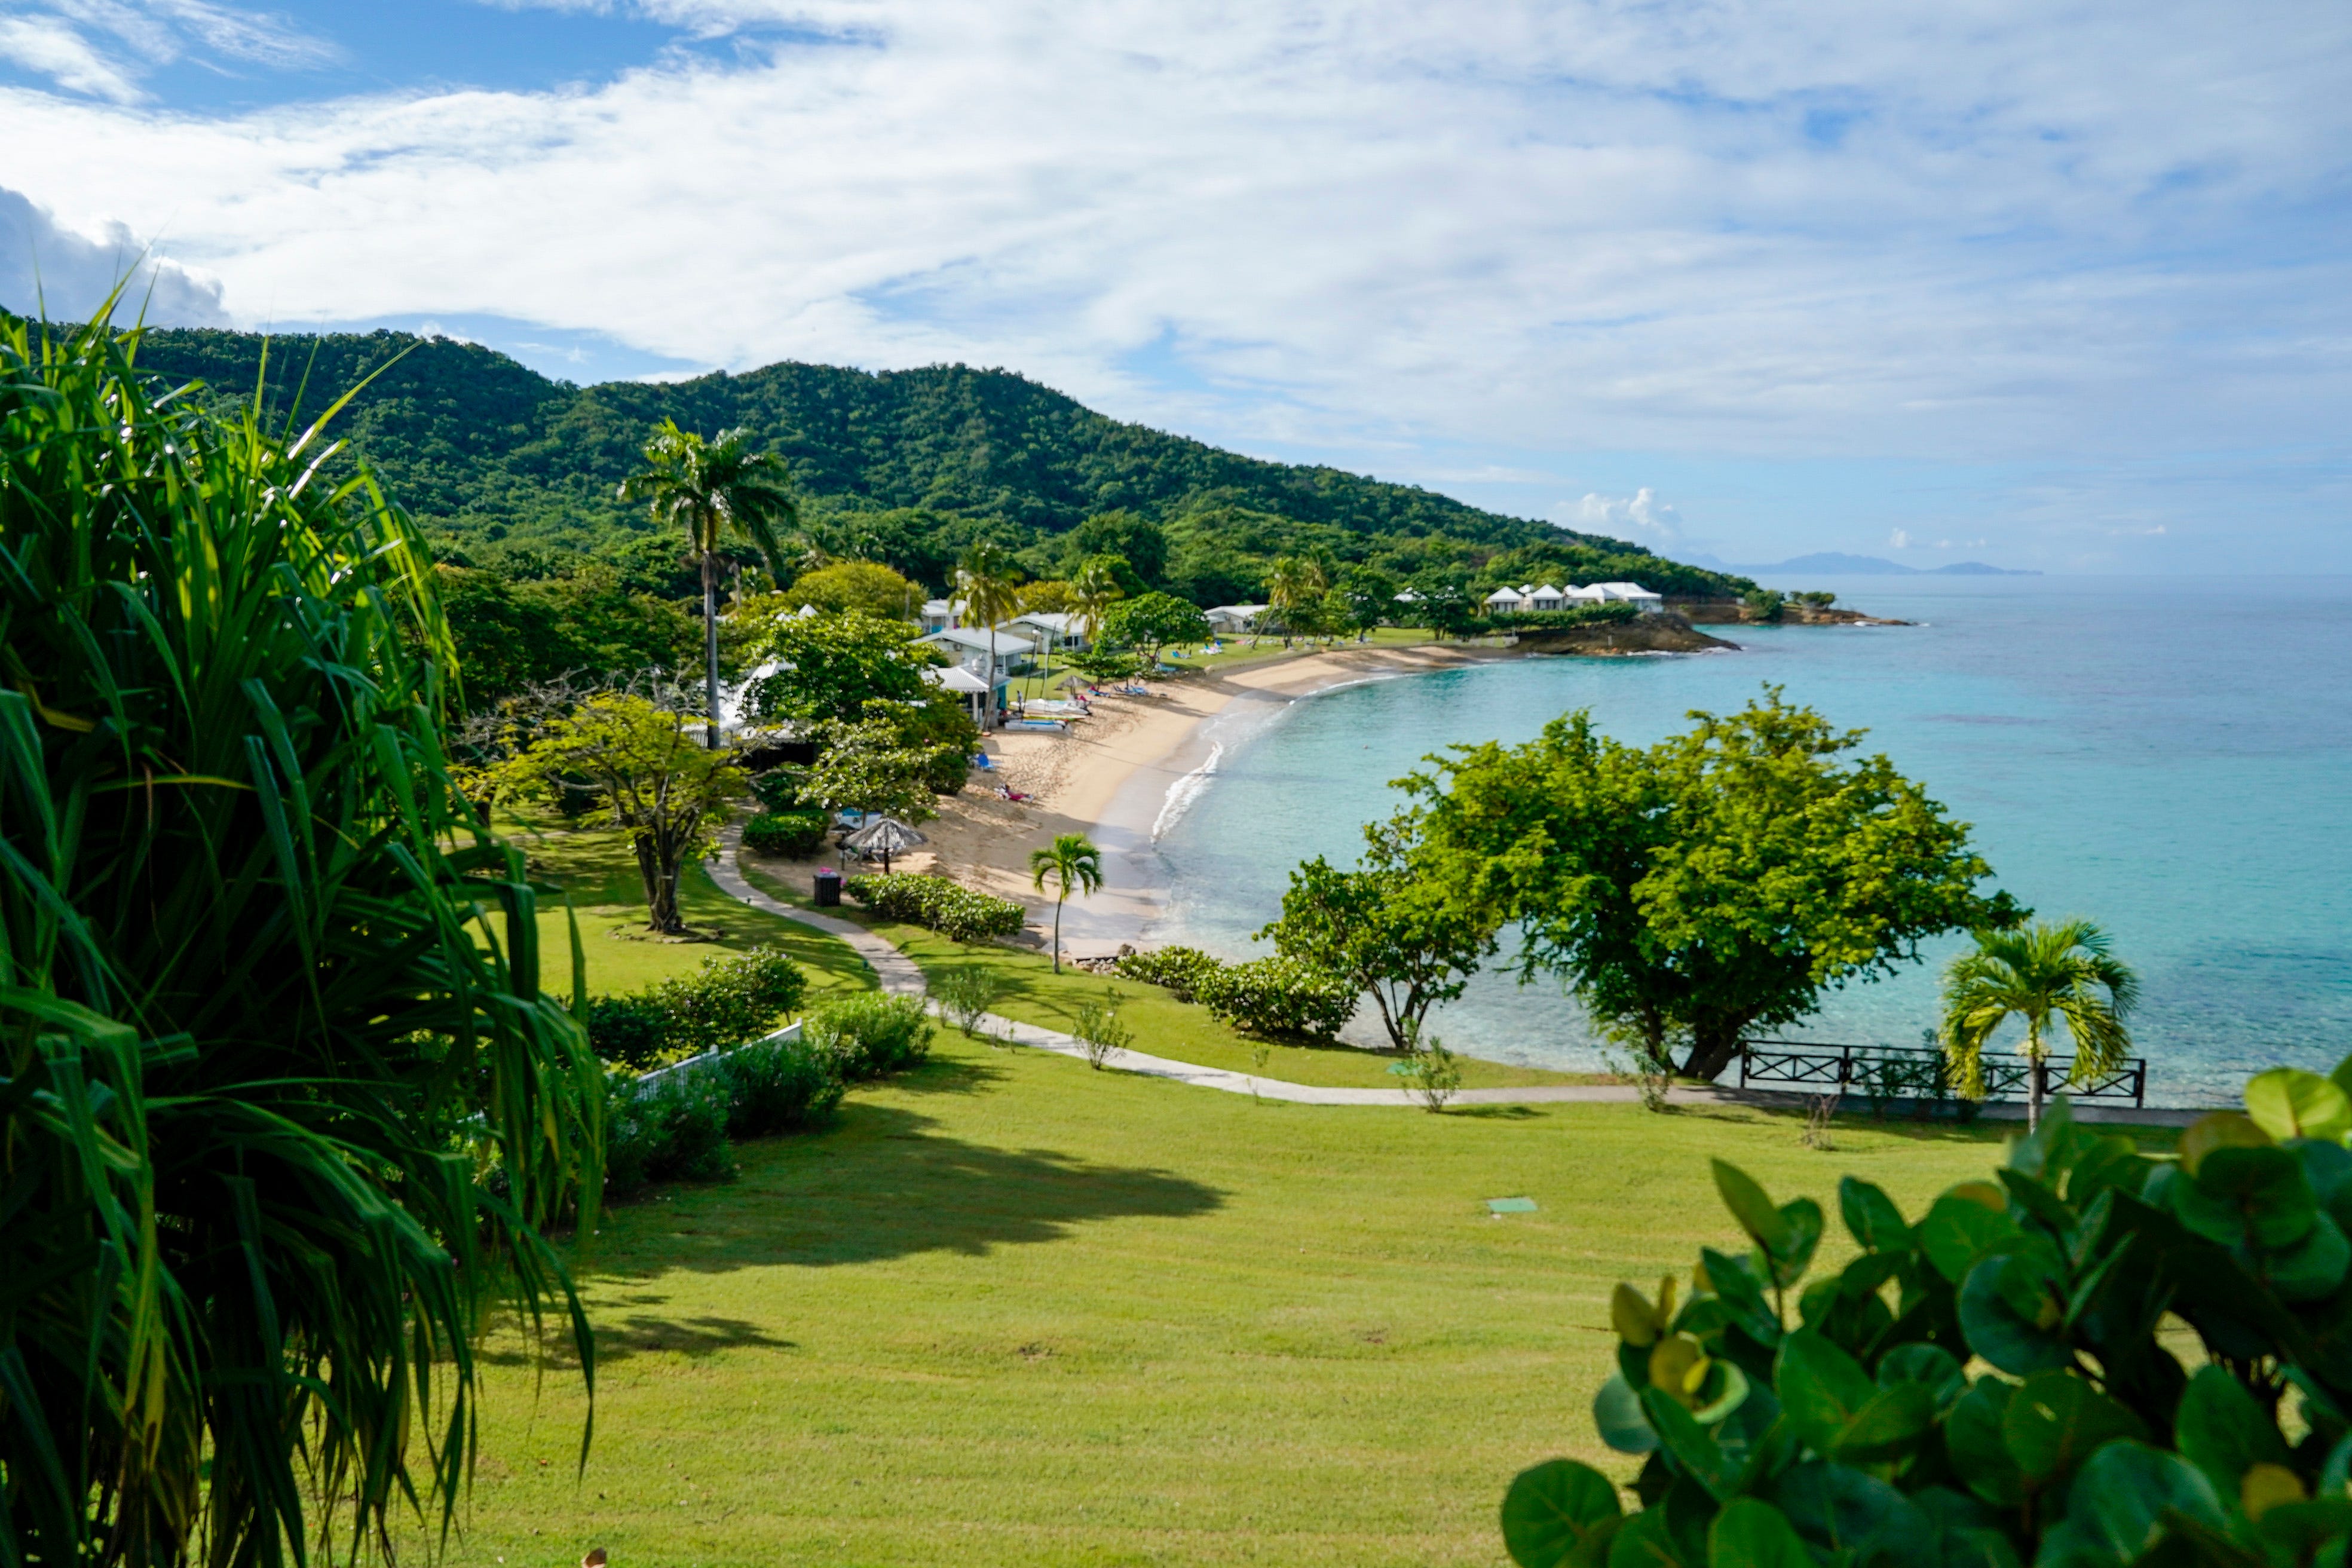 Antigua, which is 108 square miles long, is known for its majestic beaches. Here is a view from the Hawksbill, one of the oldest resorts on the island. An old sugar mill on the property has been converted into the resort's gift shop.